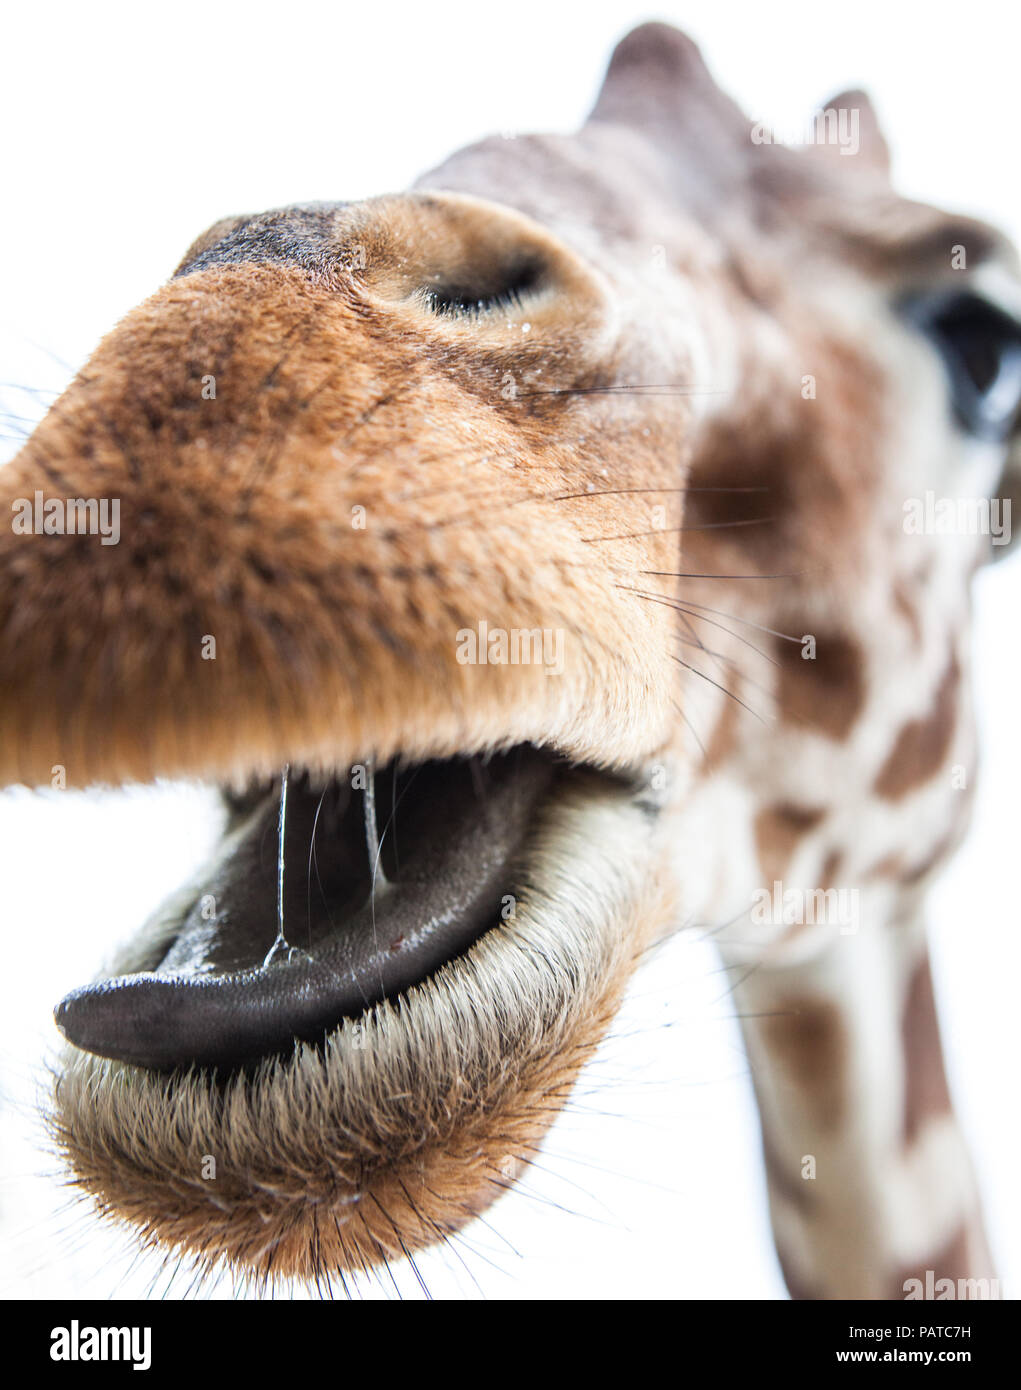 A Giraffe heading towards you with its mouth open and saliva showing and tongue about to poke out. Stock Photo